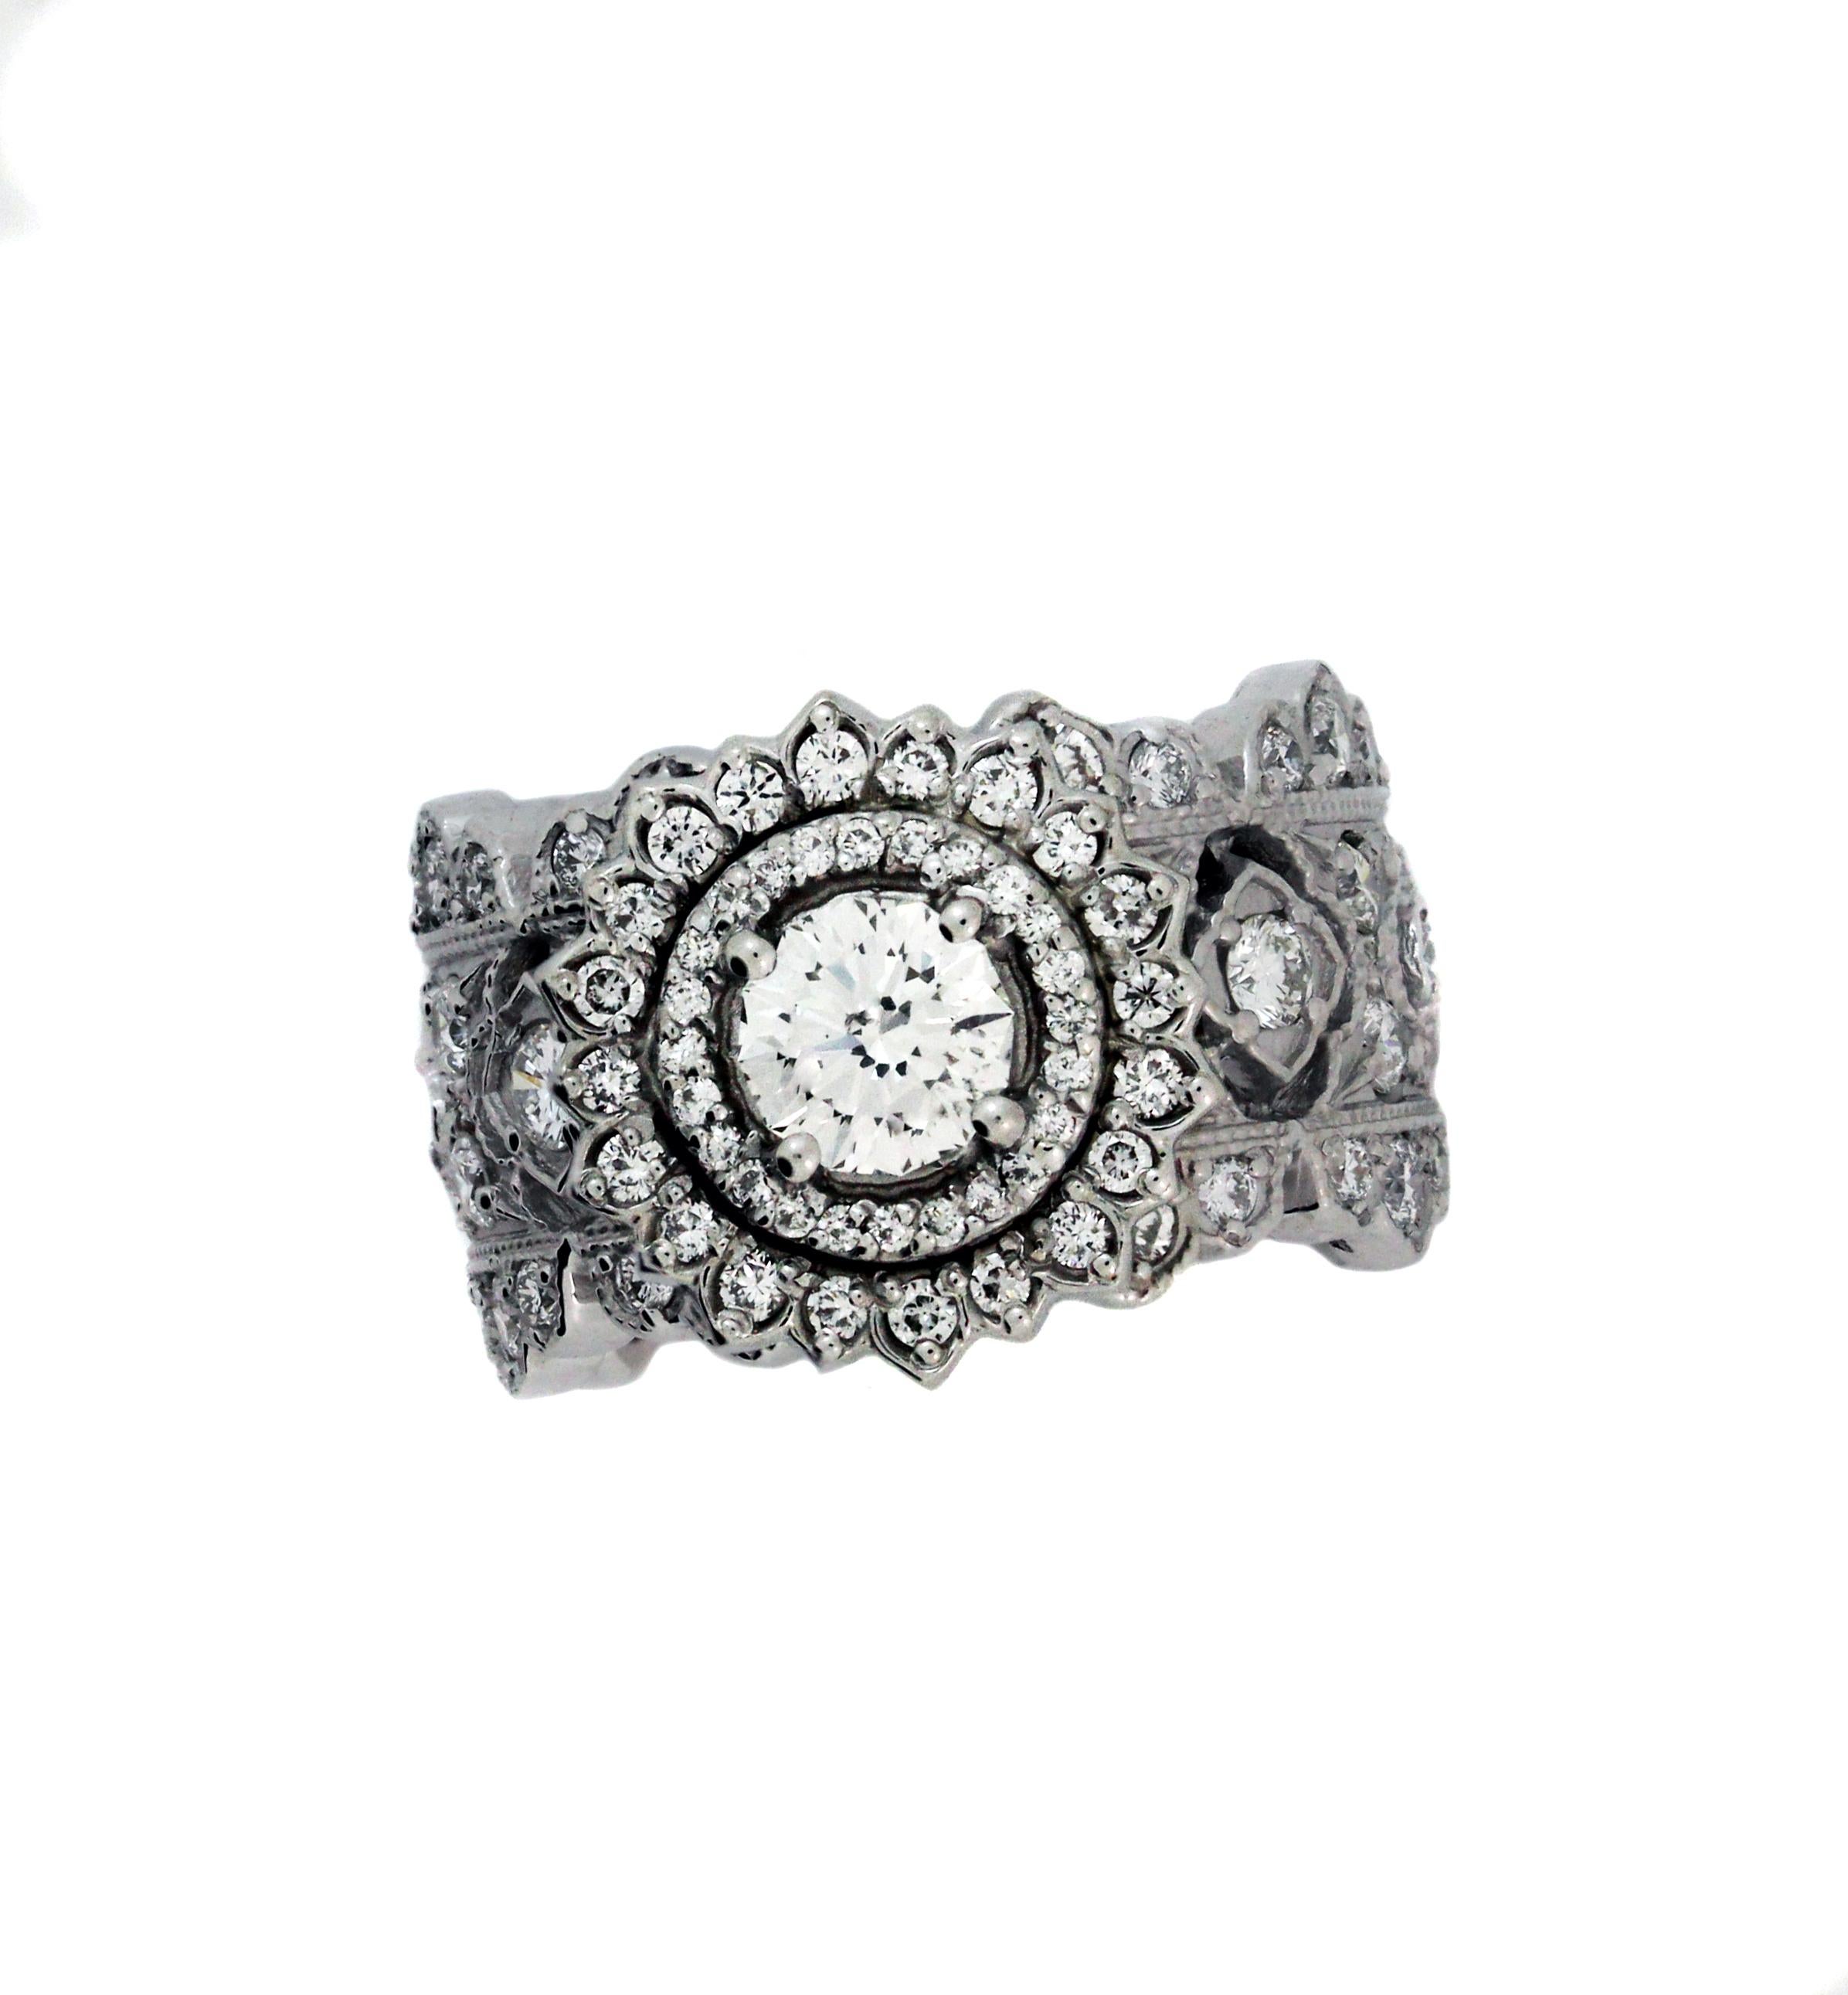 18K White Gold and Diamond Wide Band Ring with 0.71 carat Diamond Center

Center 0.71 carat diamond is G color, SI clarity and is surrounded by double diamond rows

Band has diamonds all throughout, from the Stambolian 